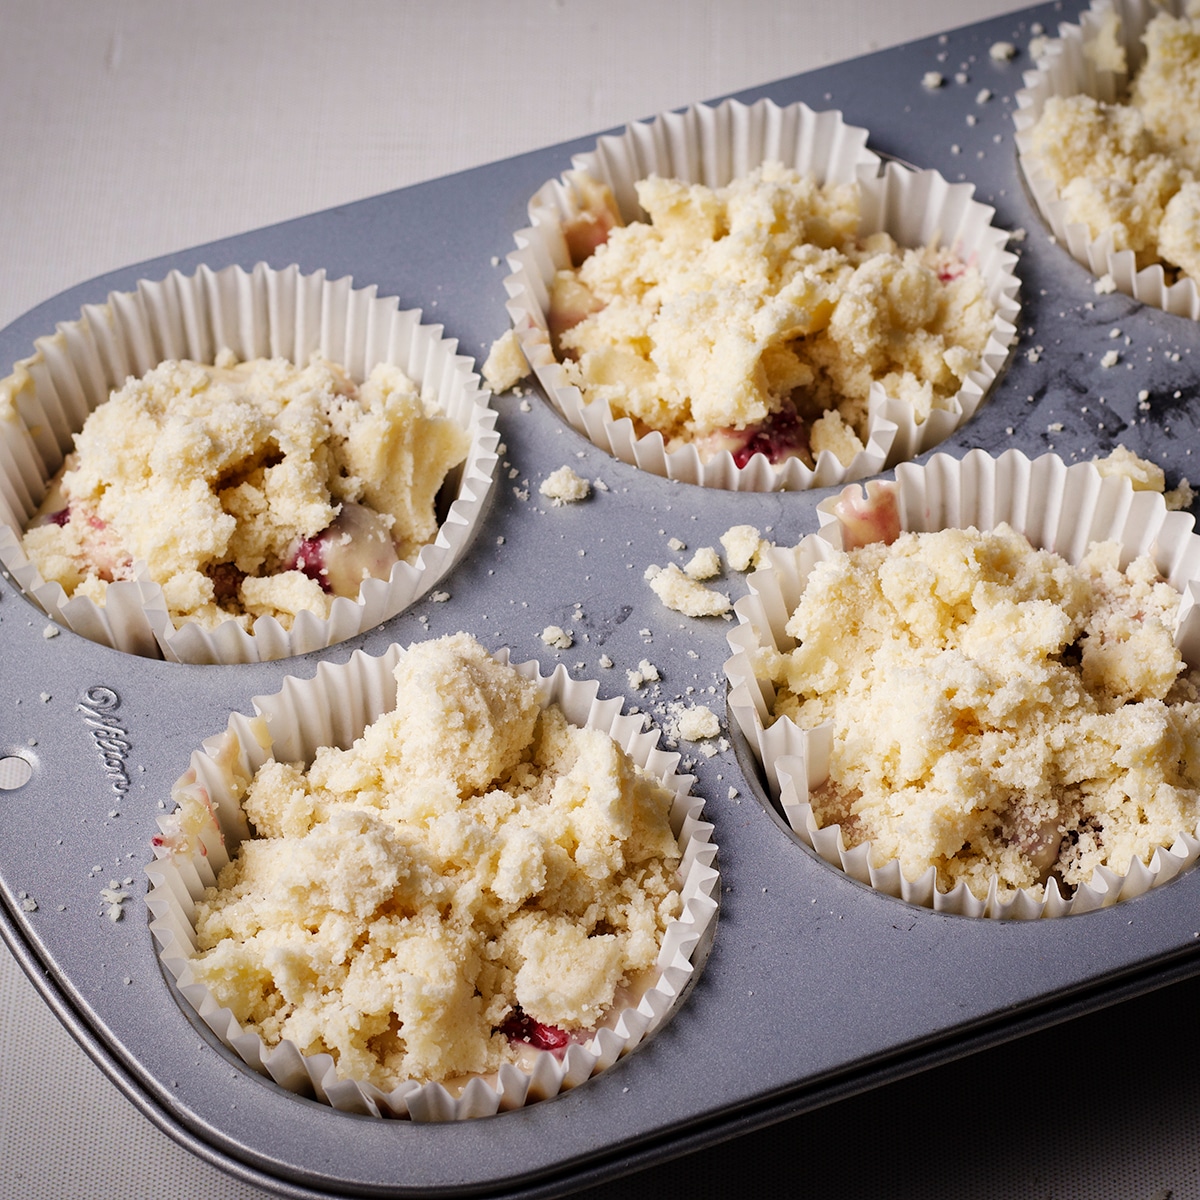 A jumbo size muffin tin fitted with paper liners that are filled with raspberry muffin batter topped with crumb topping.